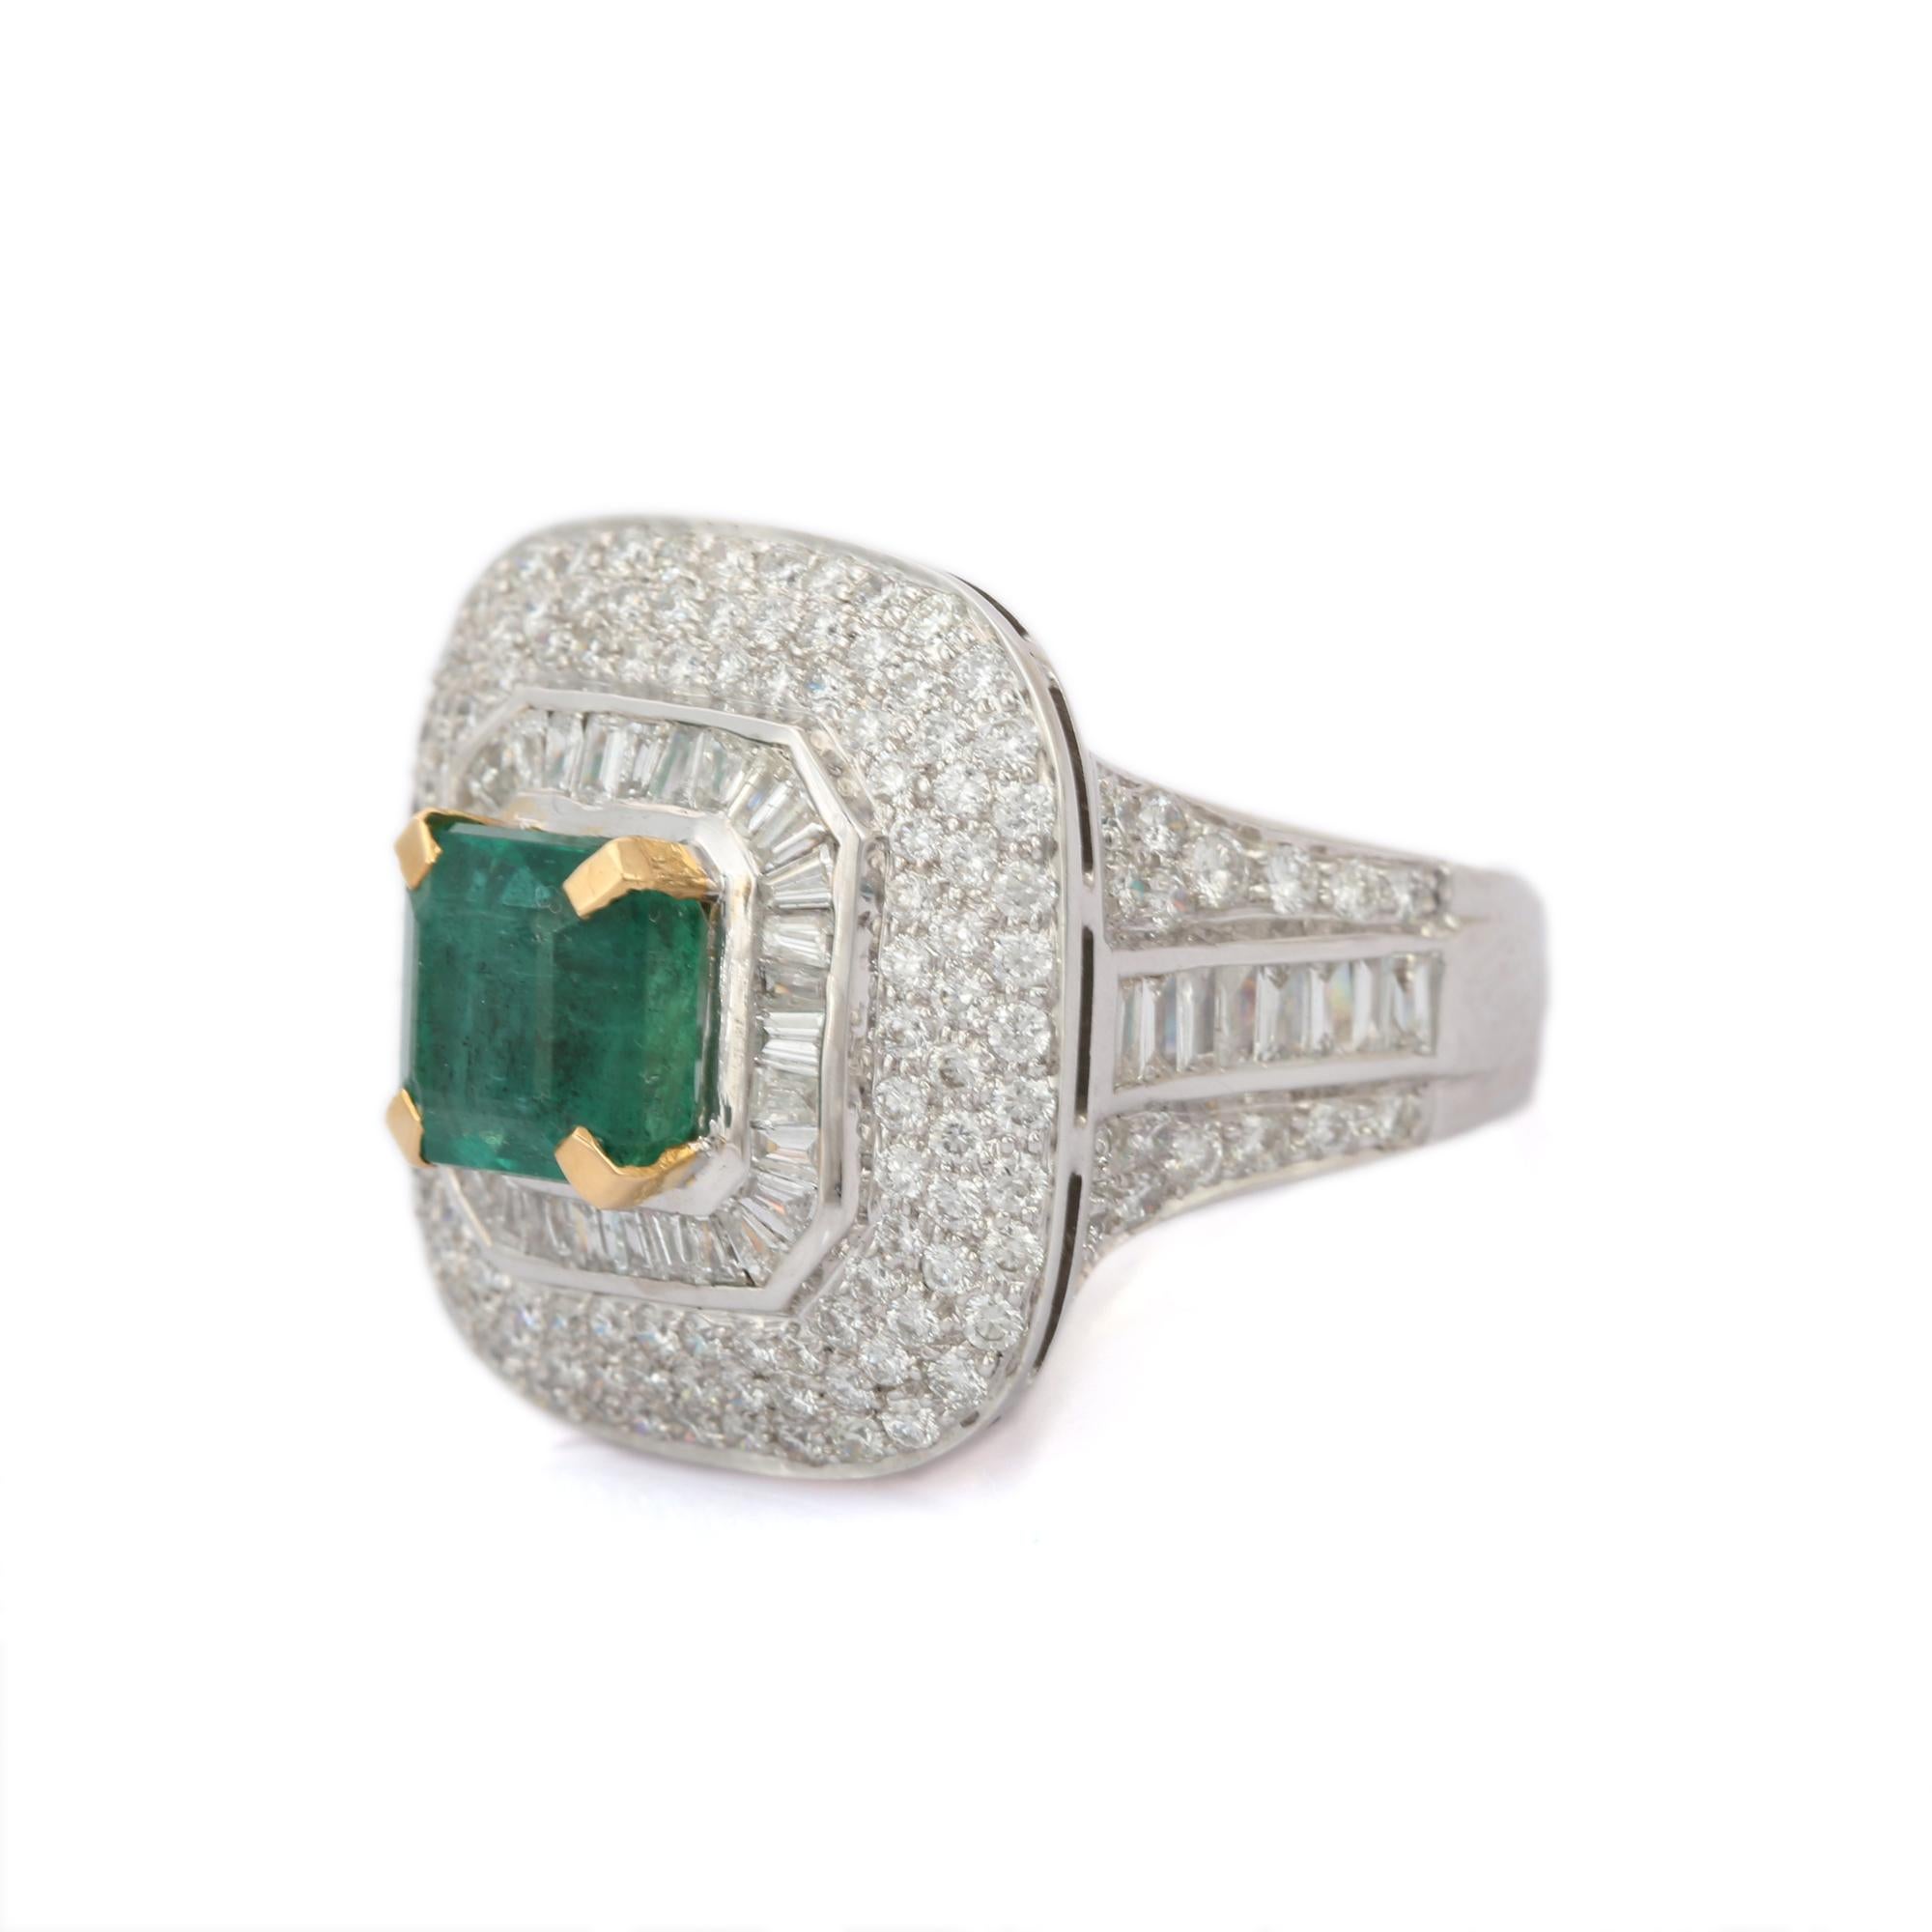 For Sale:  18kt Solid White Gold Diamond Studded Big Emerald Ring For Women 3